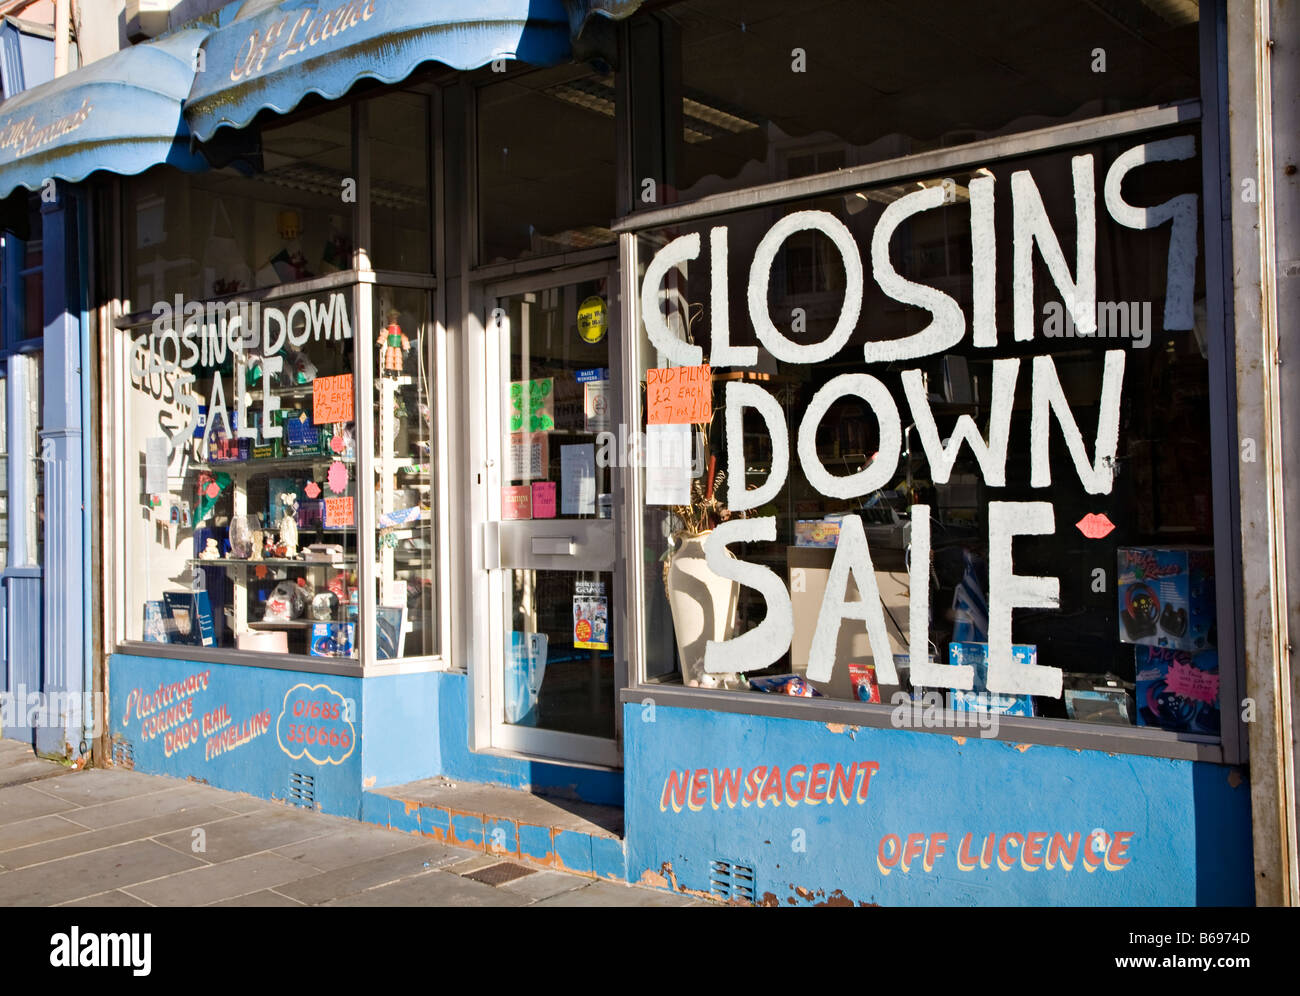 Shop with closing down sale sign in window Merthyr Tydfil Wales UK Stock Photo